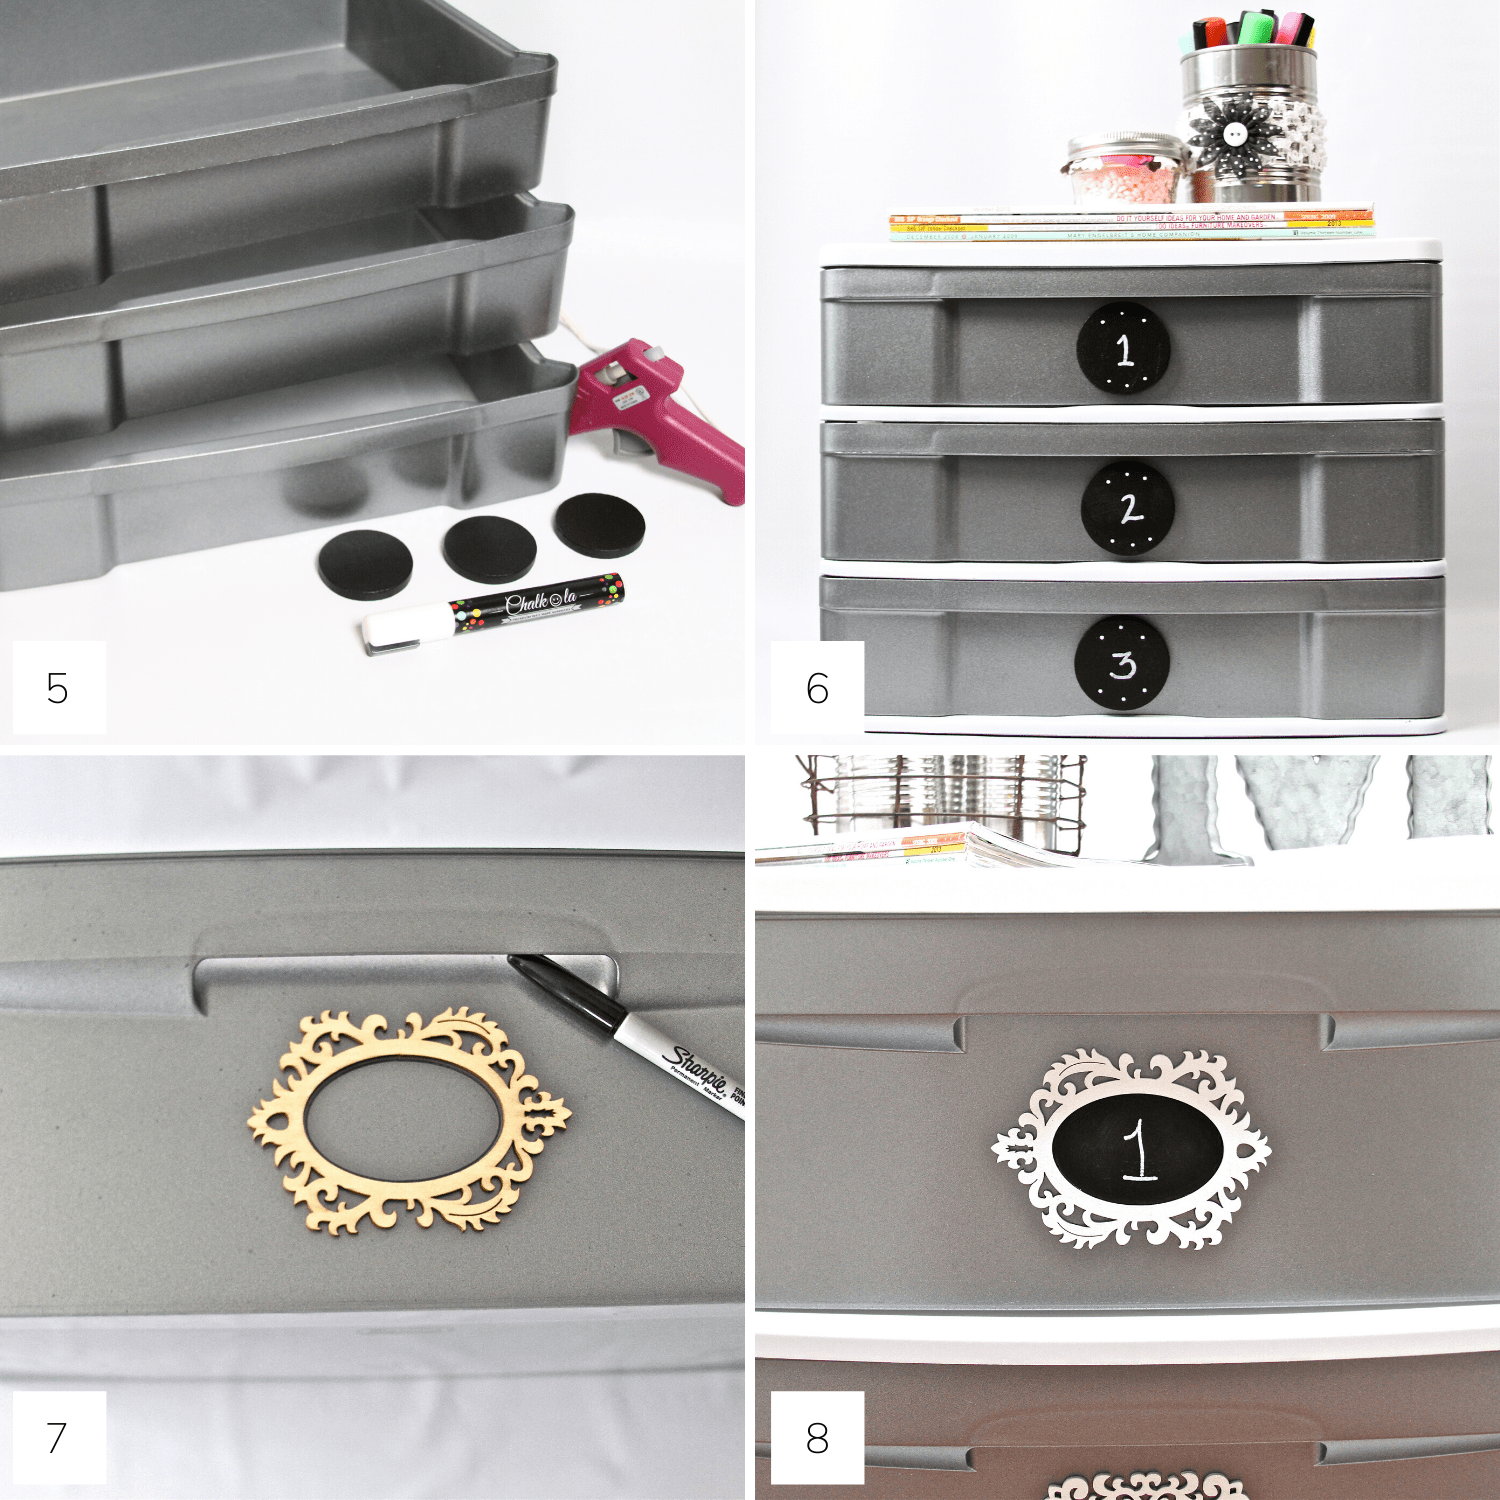 DIY Faux Stainless Steel Plastic Drawers Step 5-8